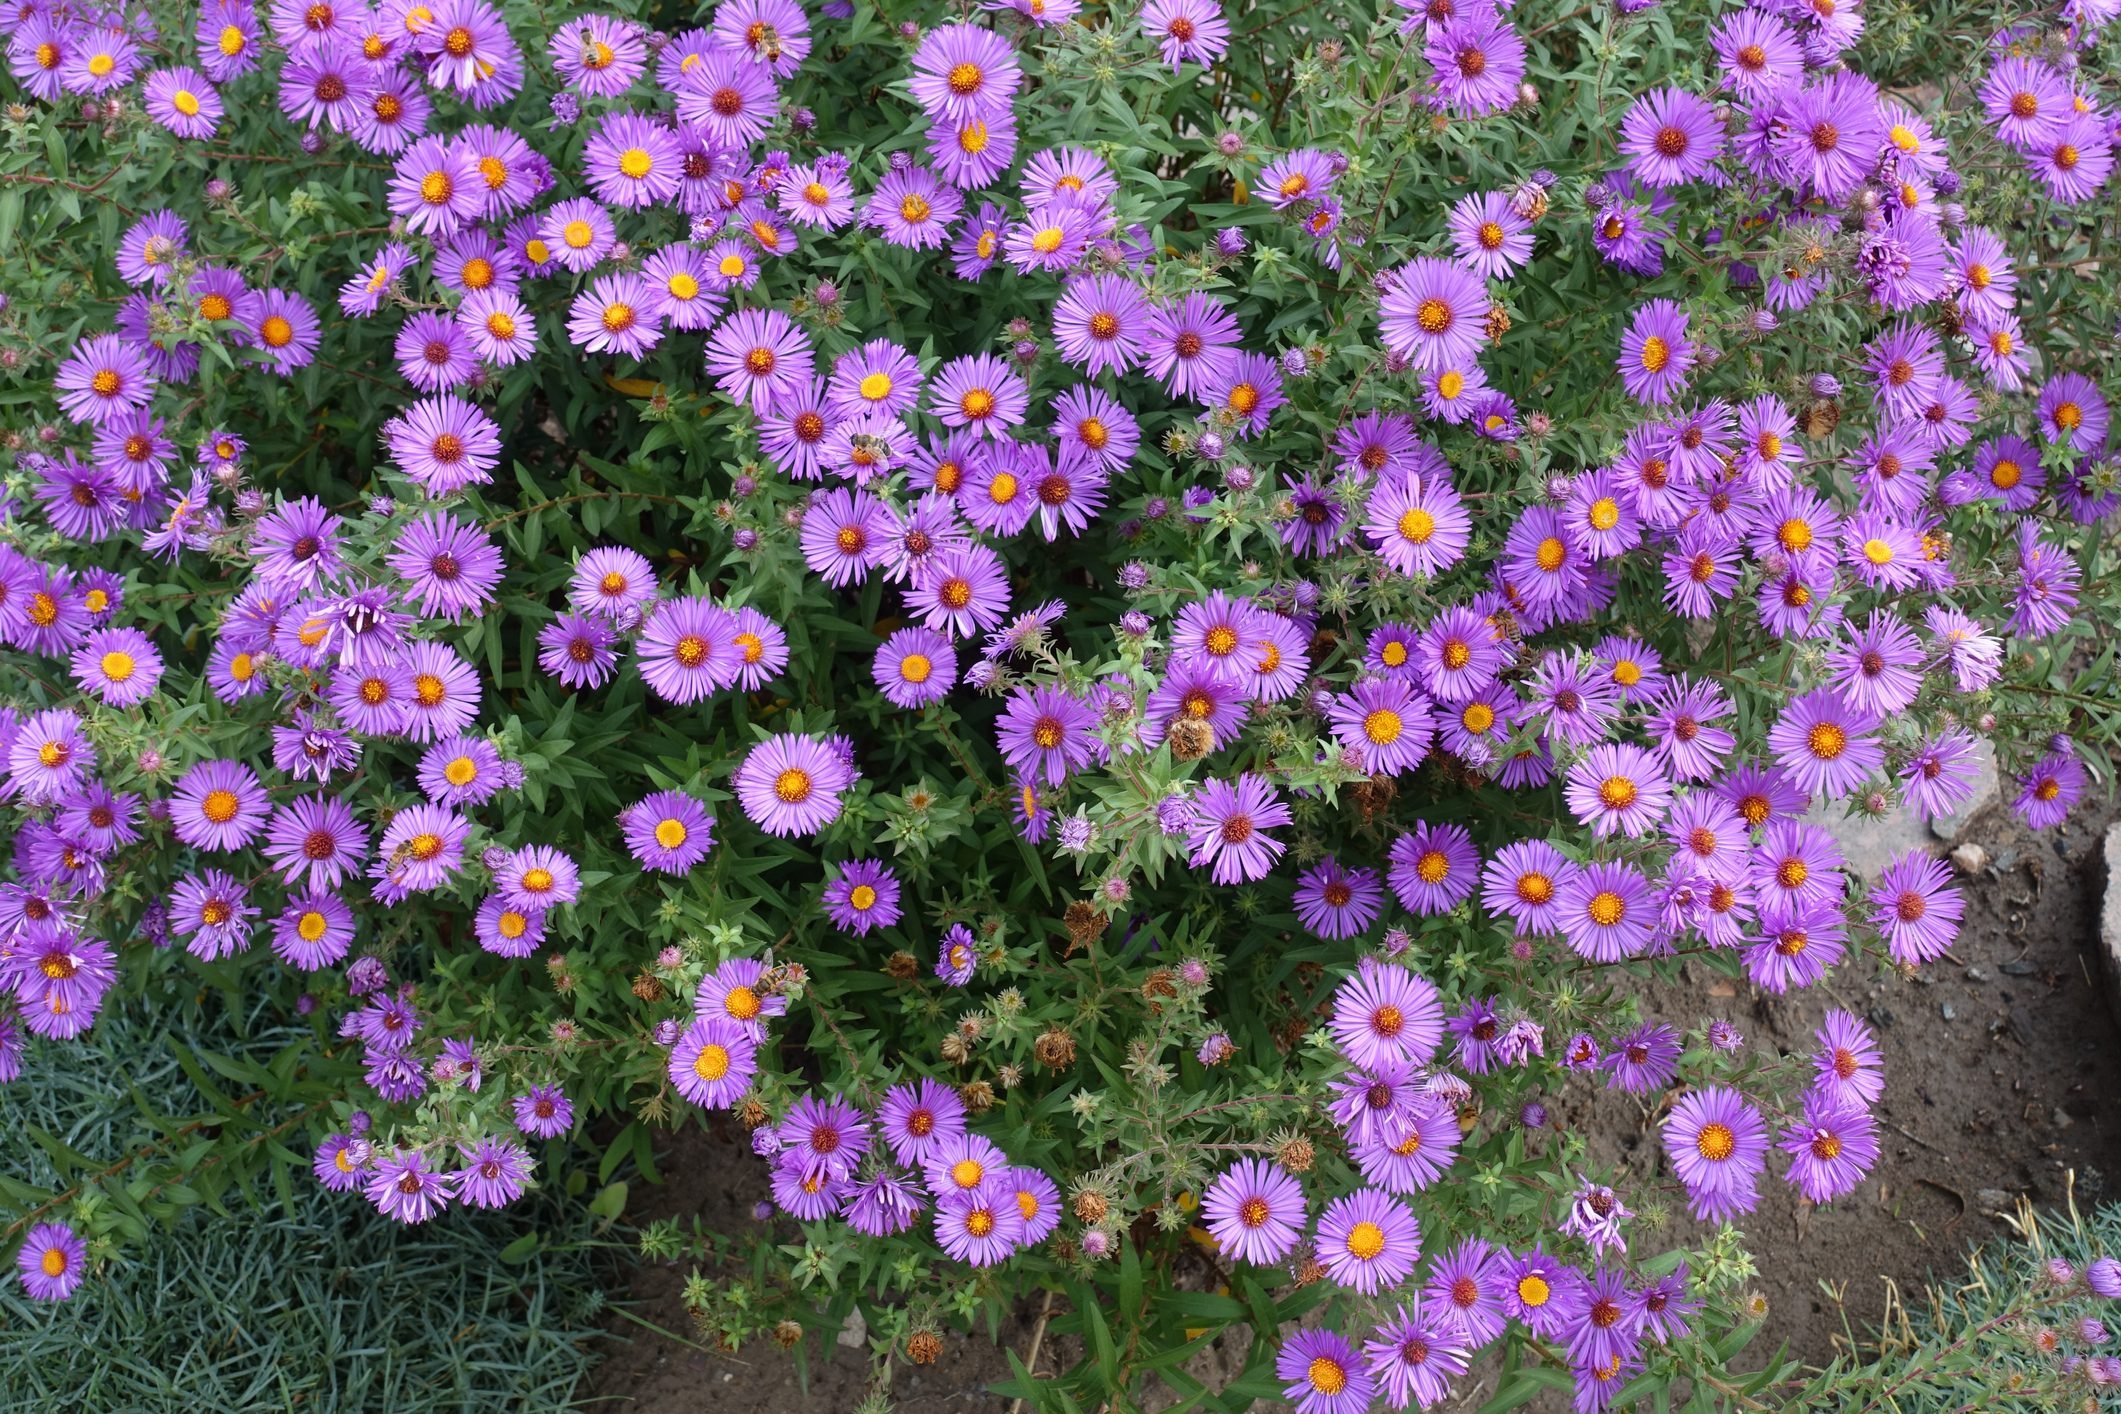 Guide To Growing Asters for Fall Flowers